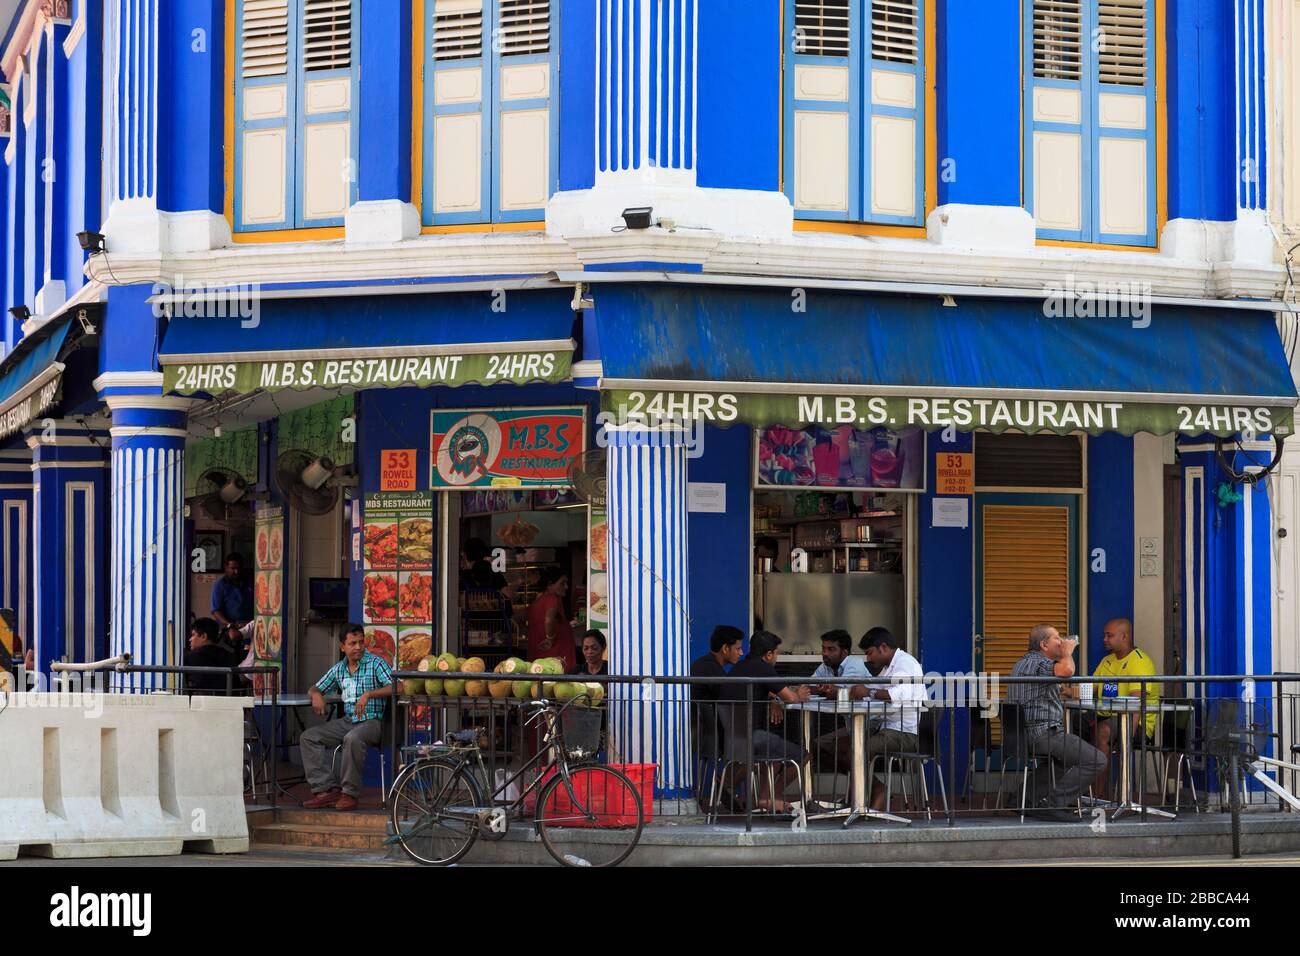 Restaurant On Rowell Road Little India District Singapore Asia Stock Photo Alamy